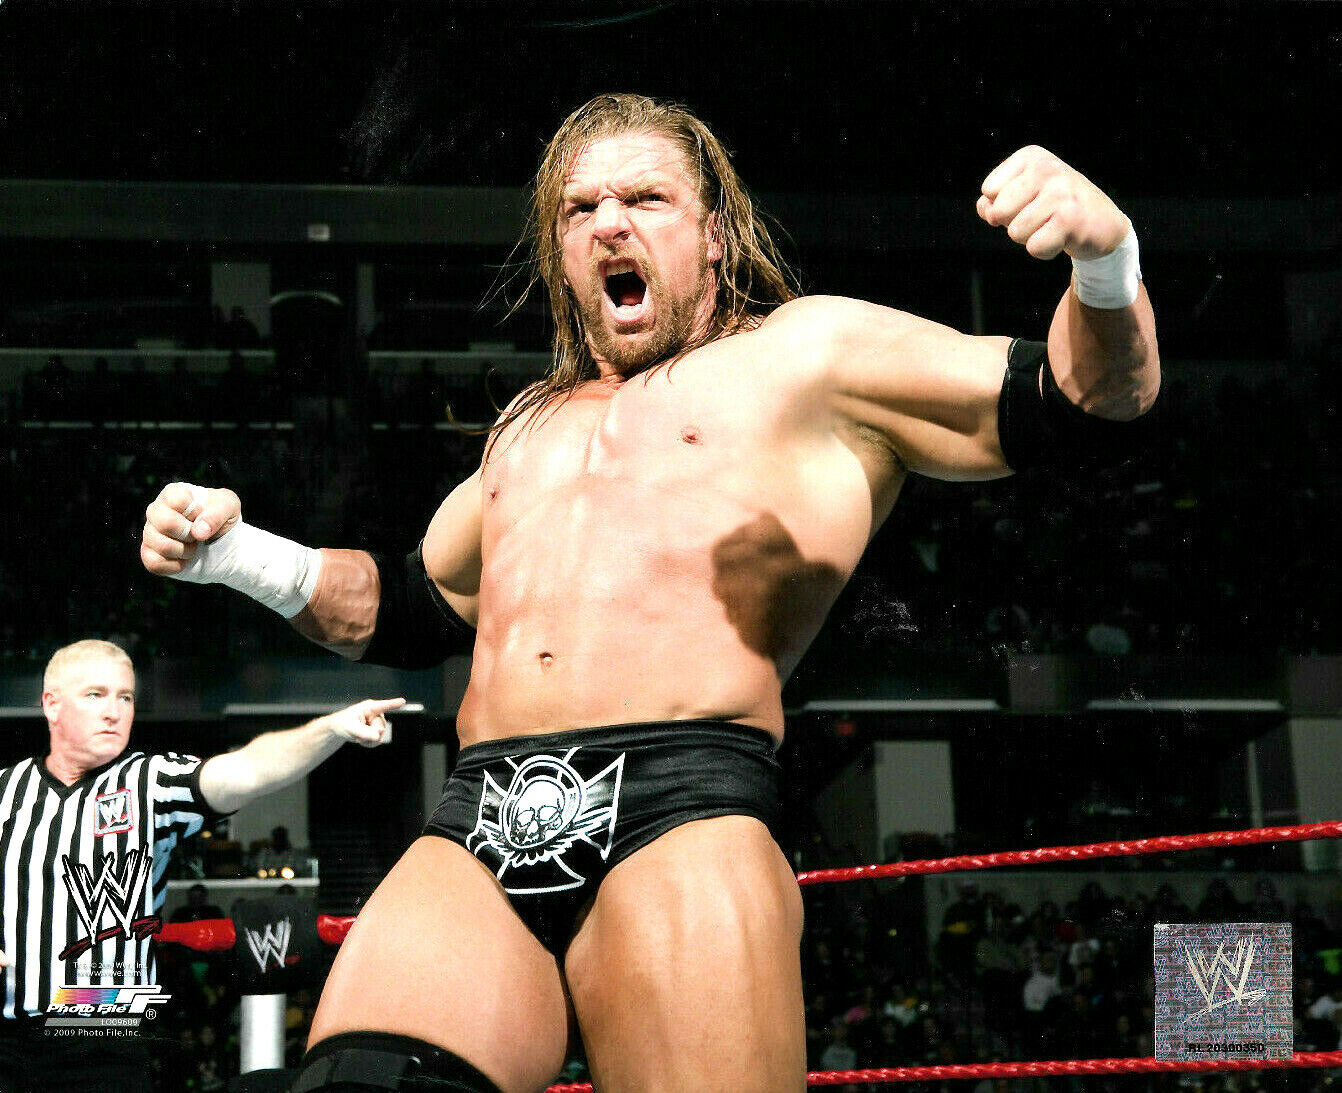 WWE TRIPLE H THE GAME OFFICIAL LICENSED 8X10 Photo Poster paintingFILE Photo Poster painting 3